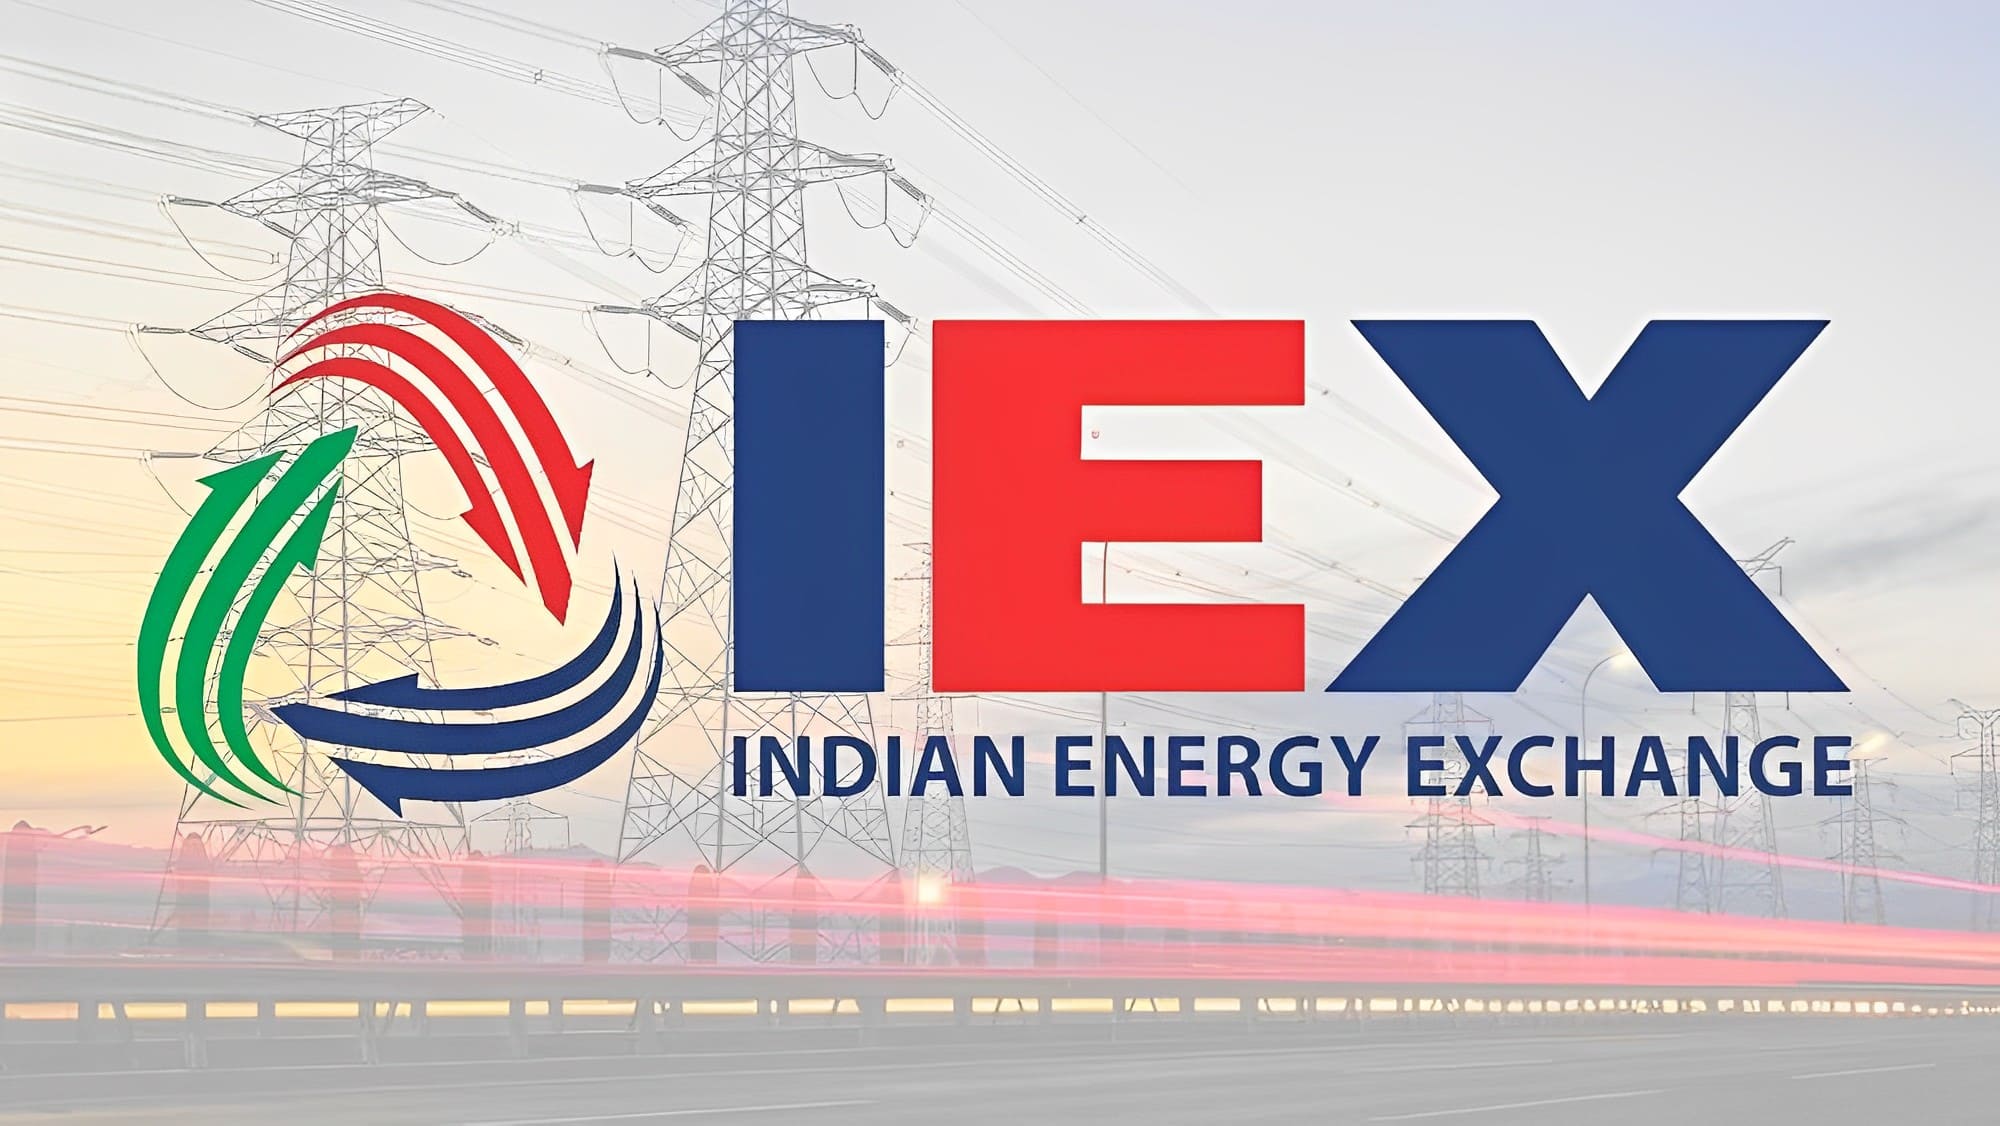 IEX to secure 10% stake in Enviro Enablers India in acquisition